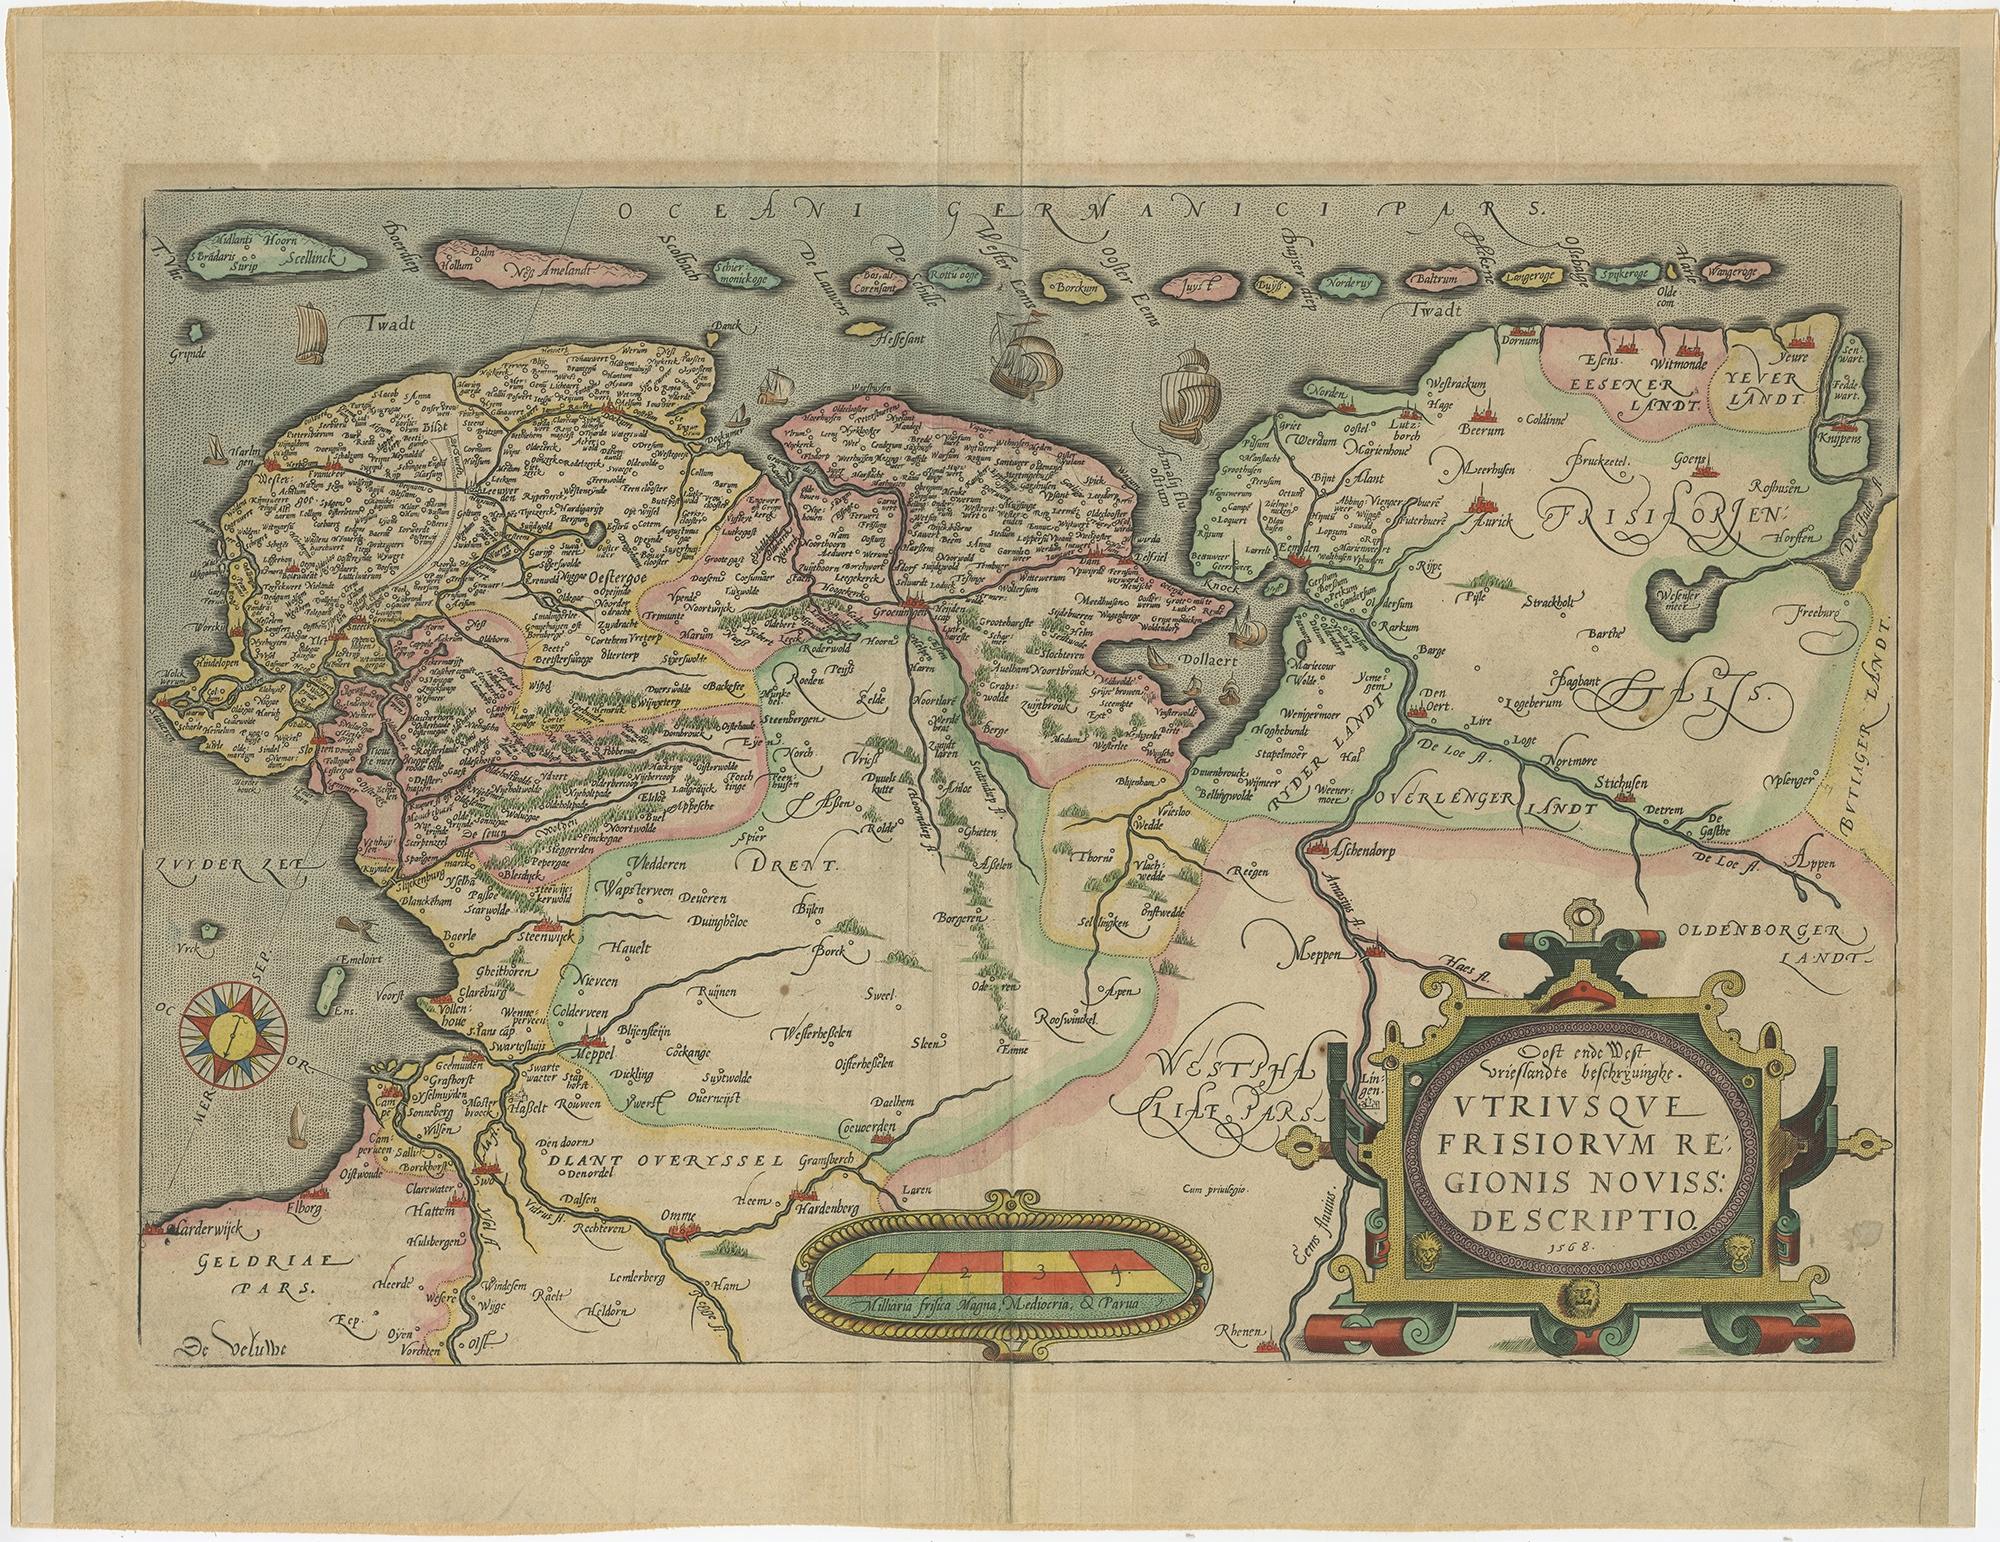 Antique map titled 'Oost end West Vrieslandts beschrijvinghe. Utriusque Frisiorum Regionis Noviss: Descriptio. 1568.' Detailed map of Friesland, the Netherlands. Includes a larger compass rose, sailing ships and an elaborate cartouche. Second state.